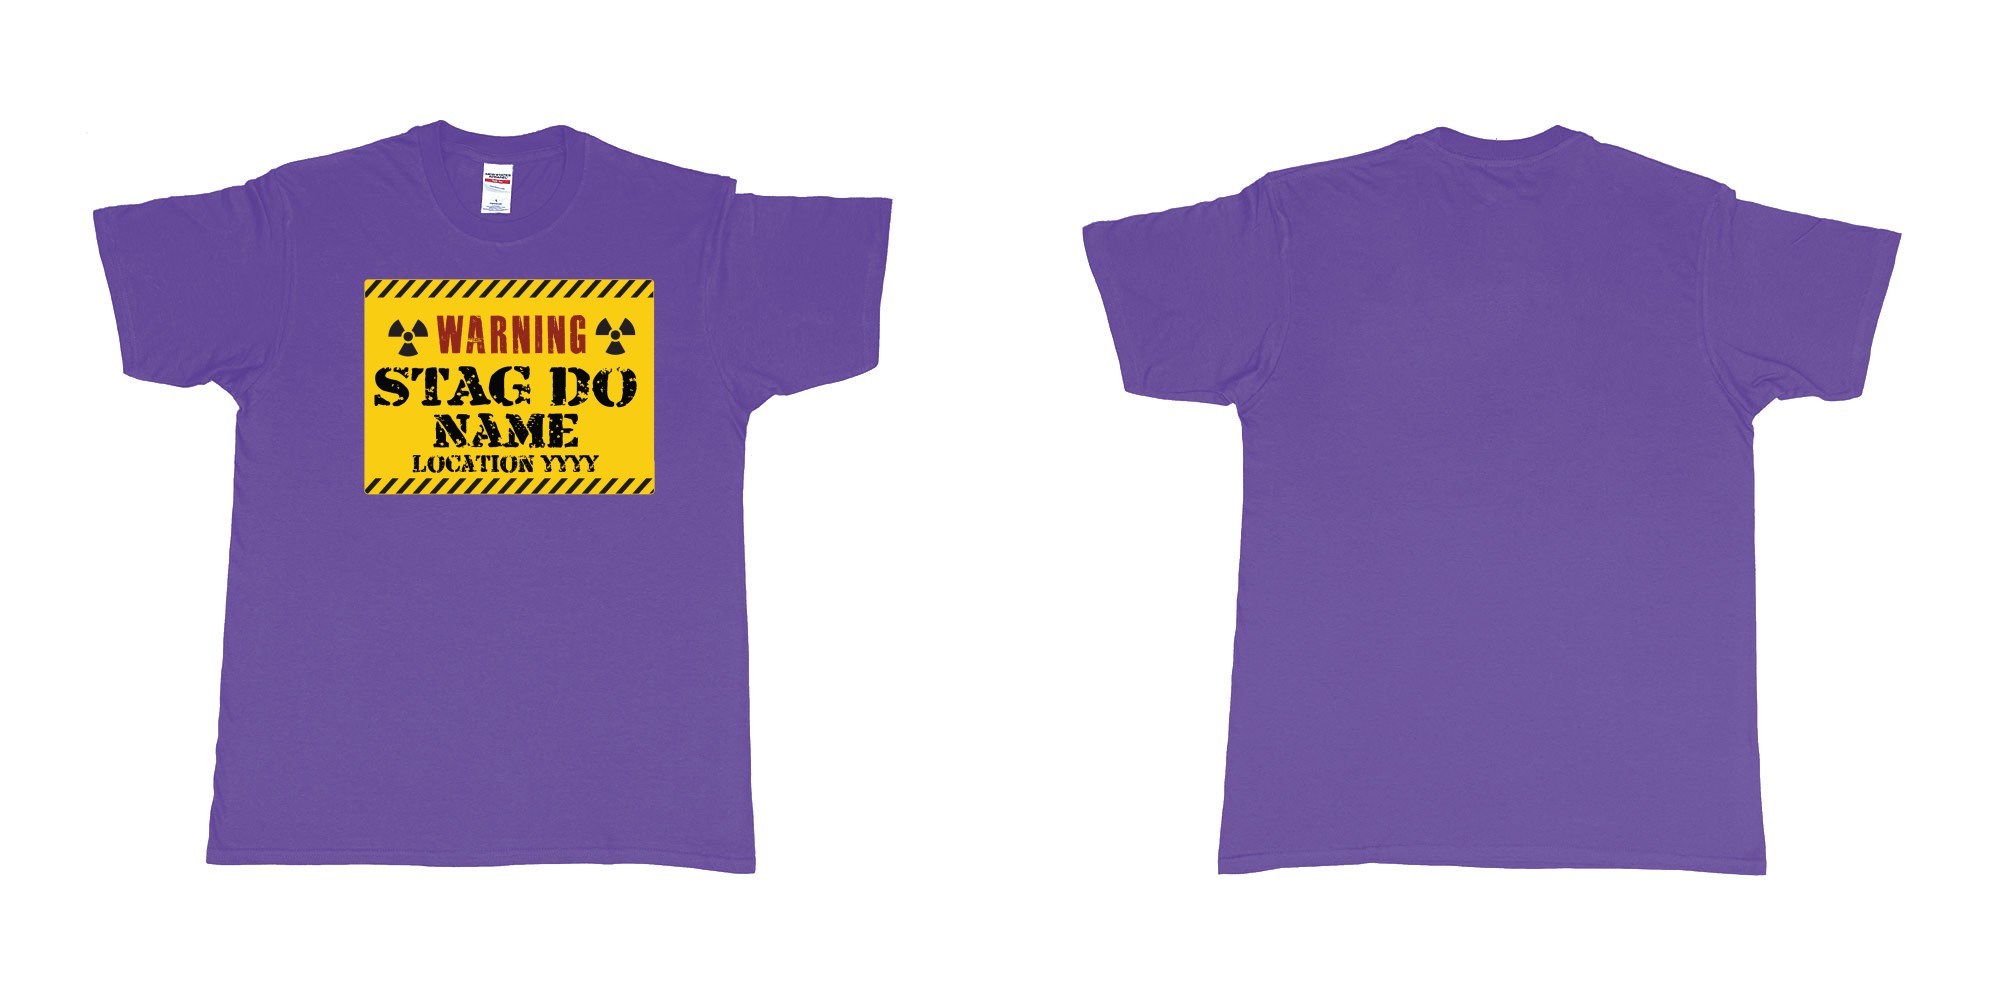 Custom tshirt design Warning Stag Do Location in fabric color purple choice your own text made in Bali by The Pirate Way